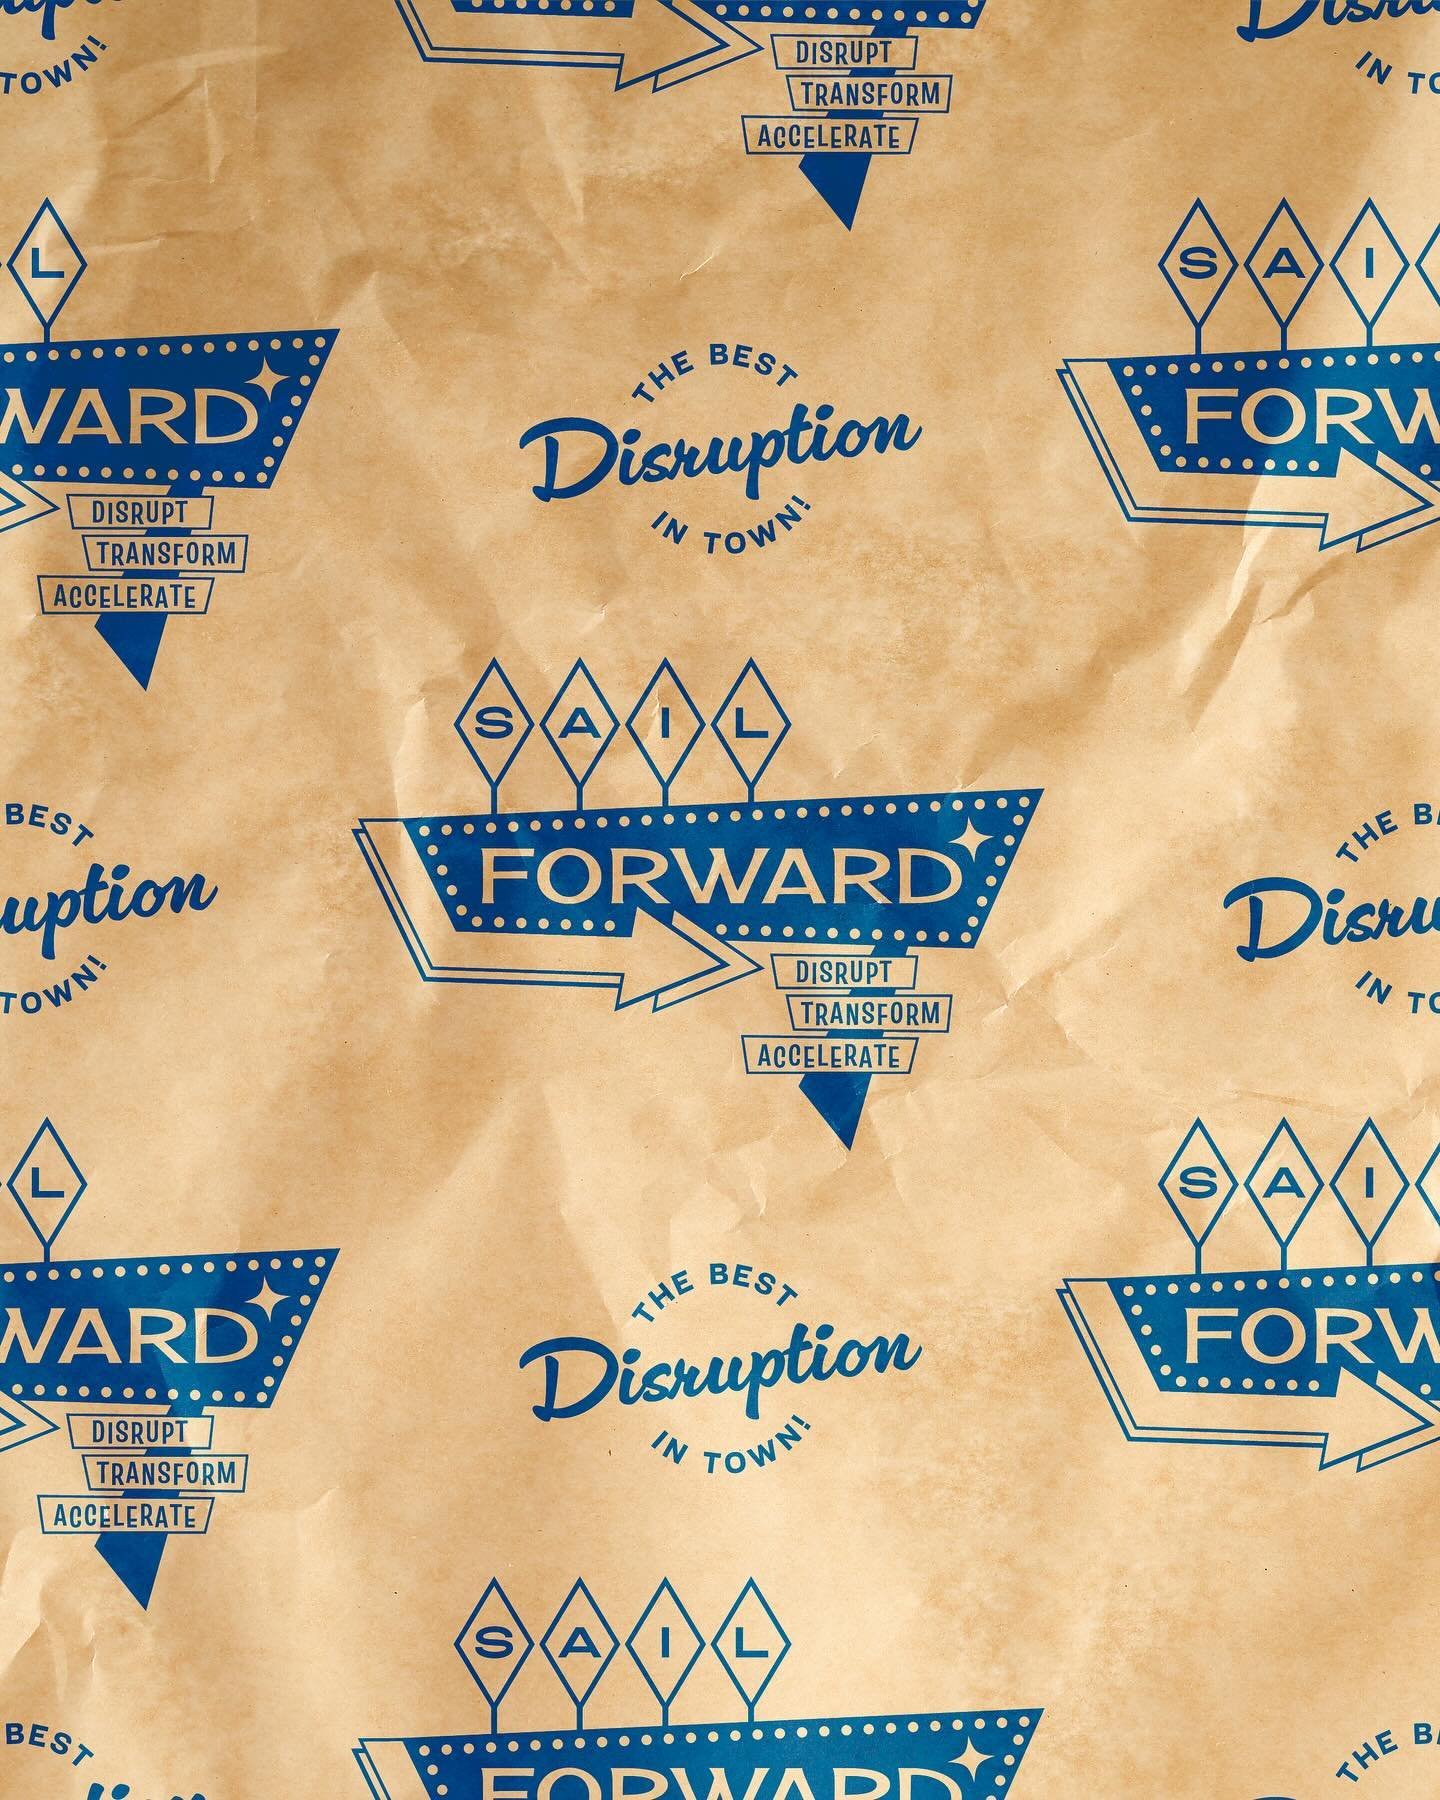 It&rsquo;s those small touches. Sliders served on retro-futuristic food paper for a 50s diner activation at a tech event. The client wanted to reimagine their 2024 event branding in a 1950s setting. Printed on compostable FSC certified paper and with